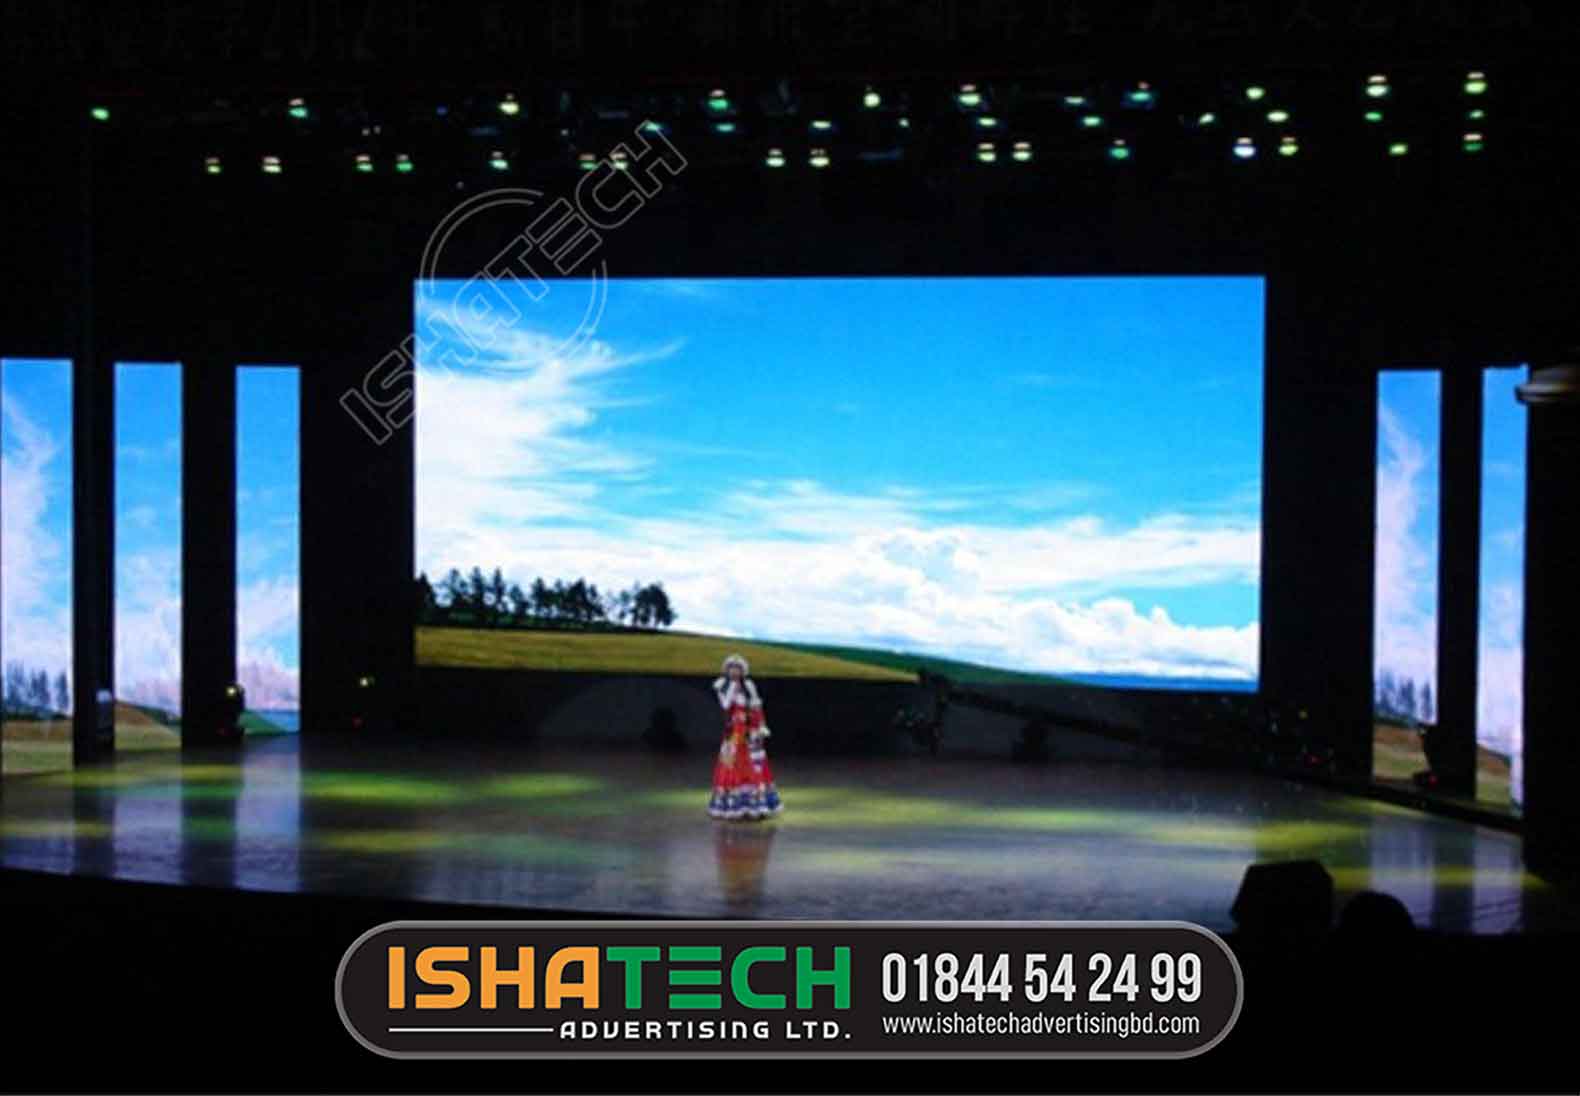 It is SZLEDWORLD’s latest rental led screen. both for the indoor and outdoor stages. The cabinet size is 500mmx500mm. it’s very light and thin, with a modular power box design. So installation and maintenance are very convenient for led screen rental.